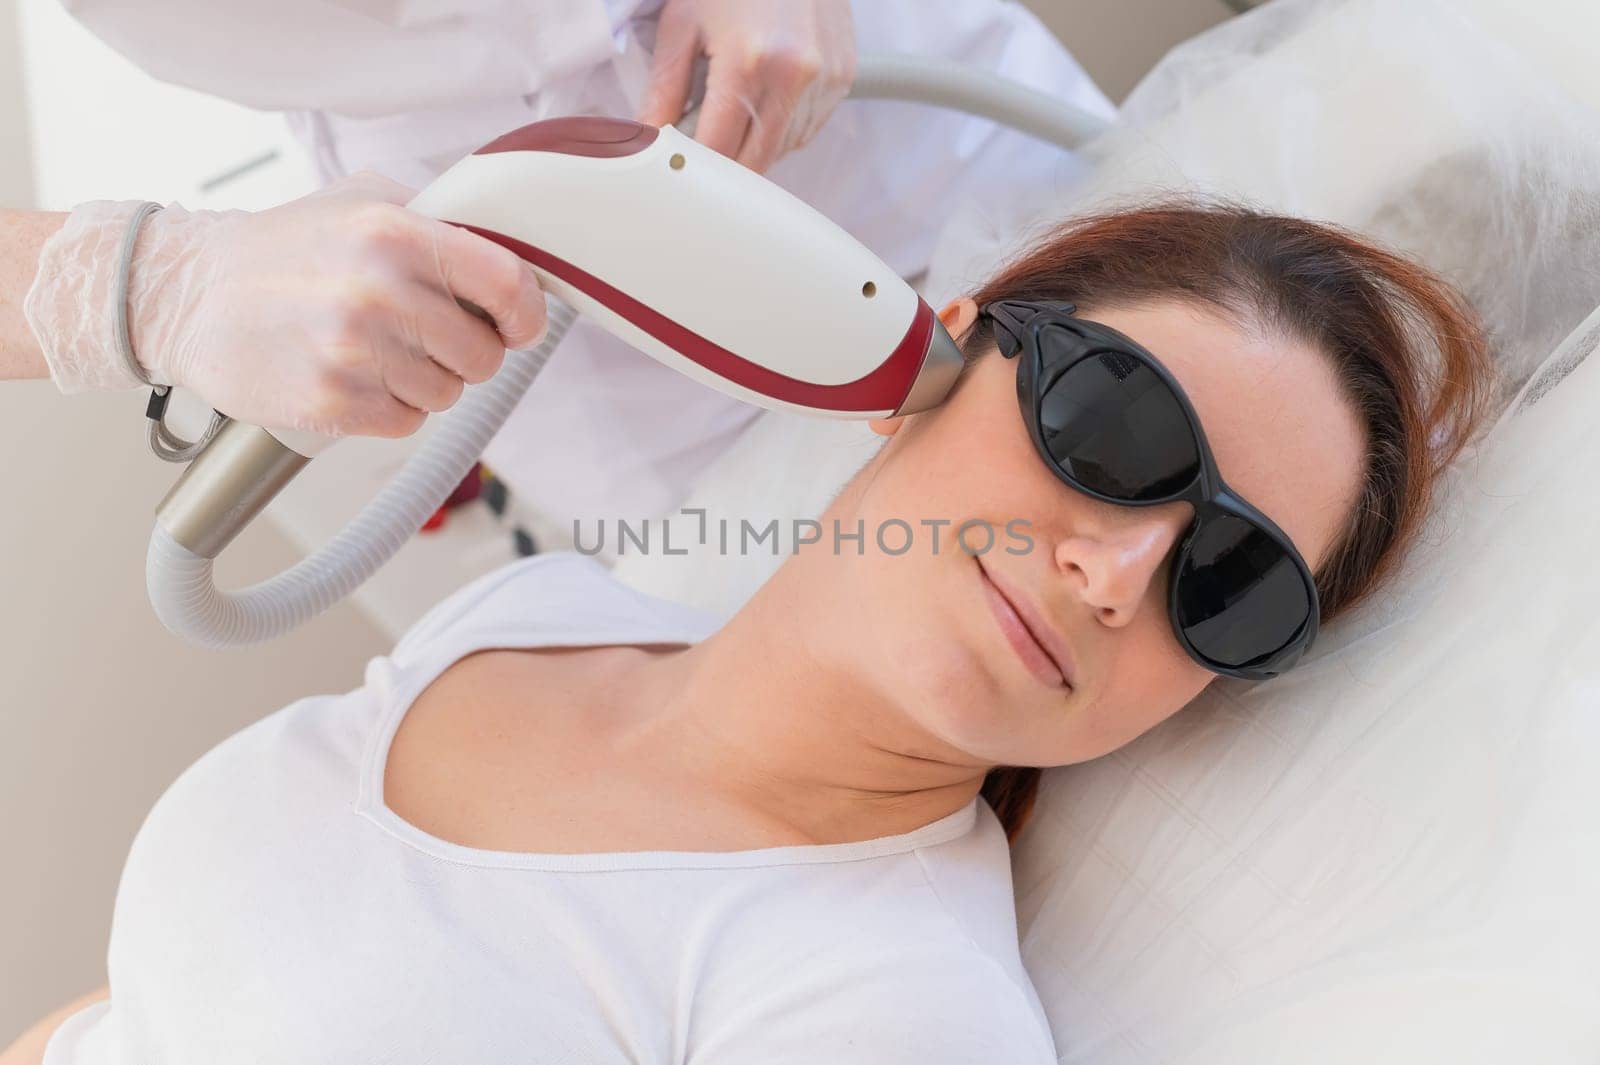 The doctor makes laser hair removal on the face of a woman in the salon. An alternative way to permanently remove unwanted hair.